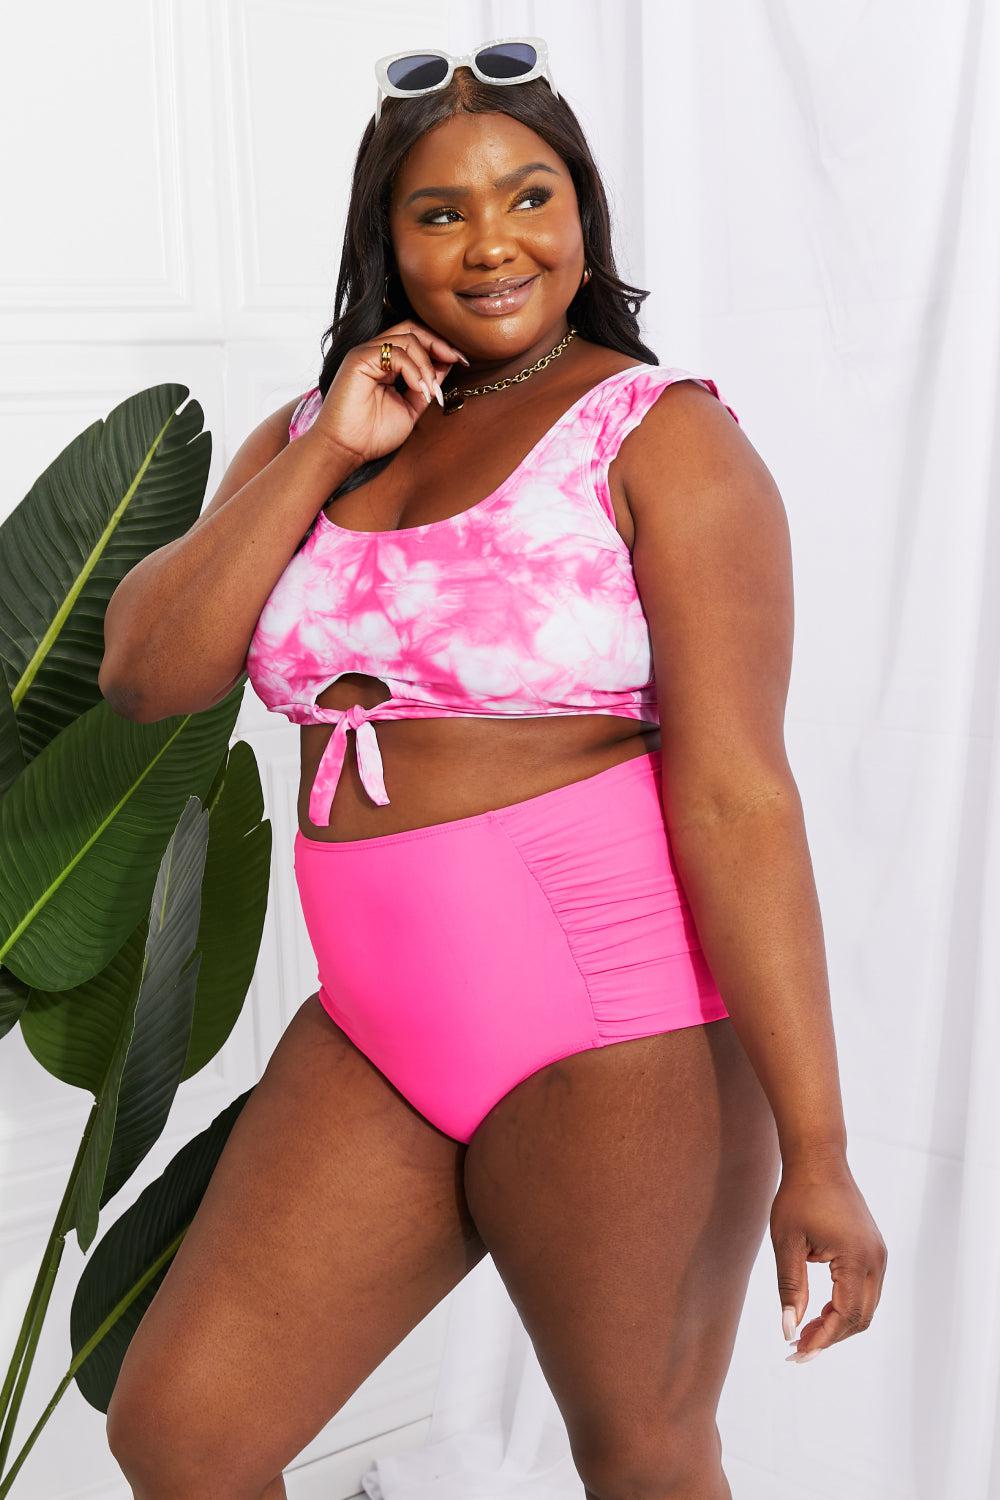 Marina West Swim Sanibel Crop Swim Top and Ruched Bottoms Set in Pink BLUE ZONE PLANET